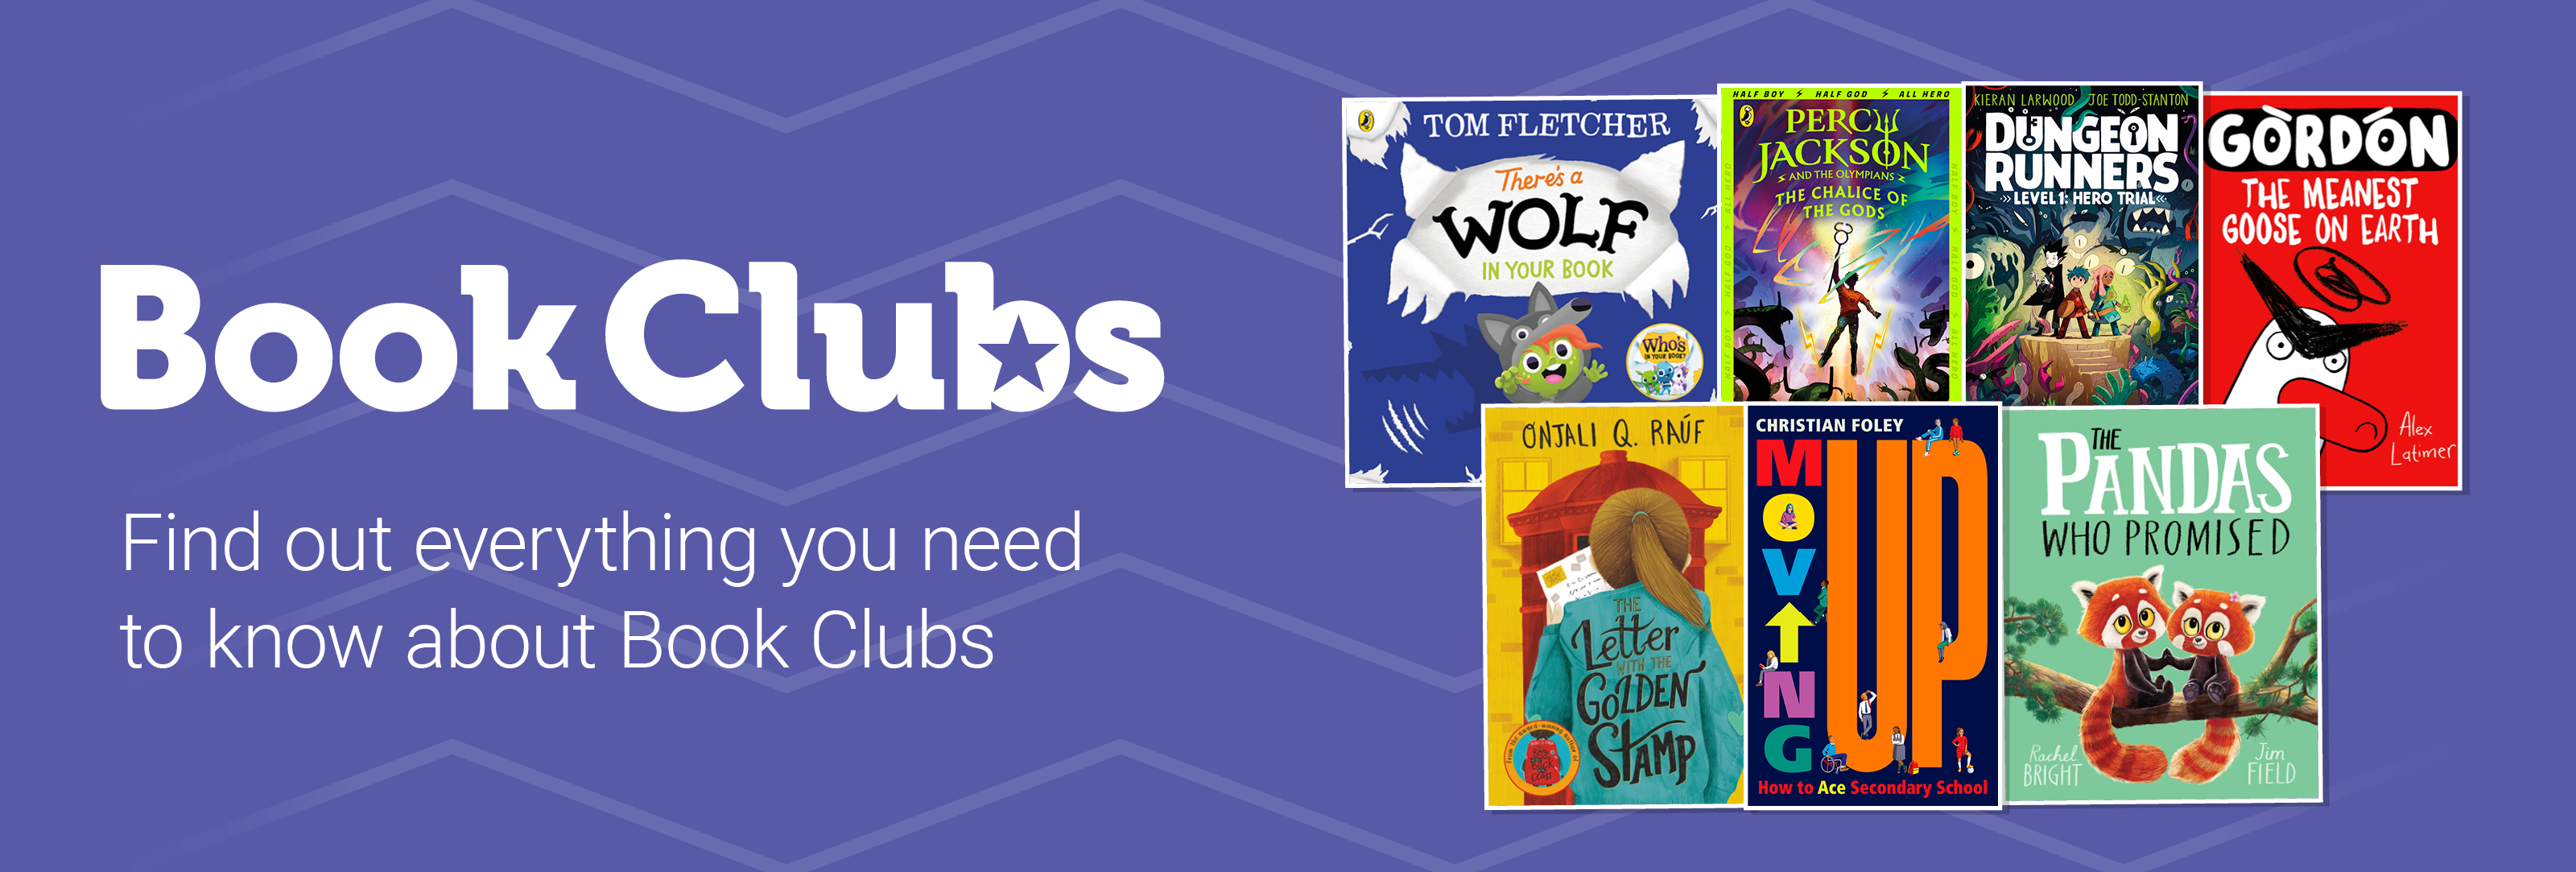 Book Clubs – find out everything you need to know about Book Clubs ...